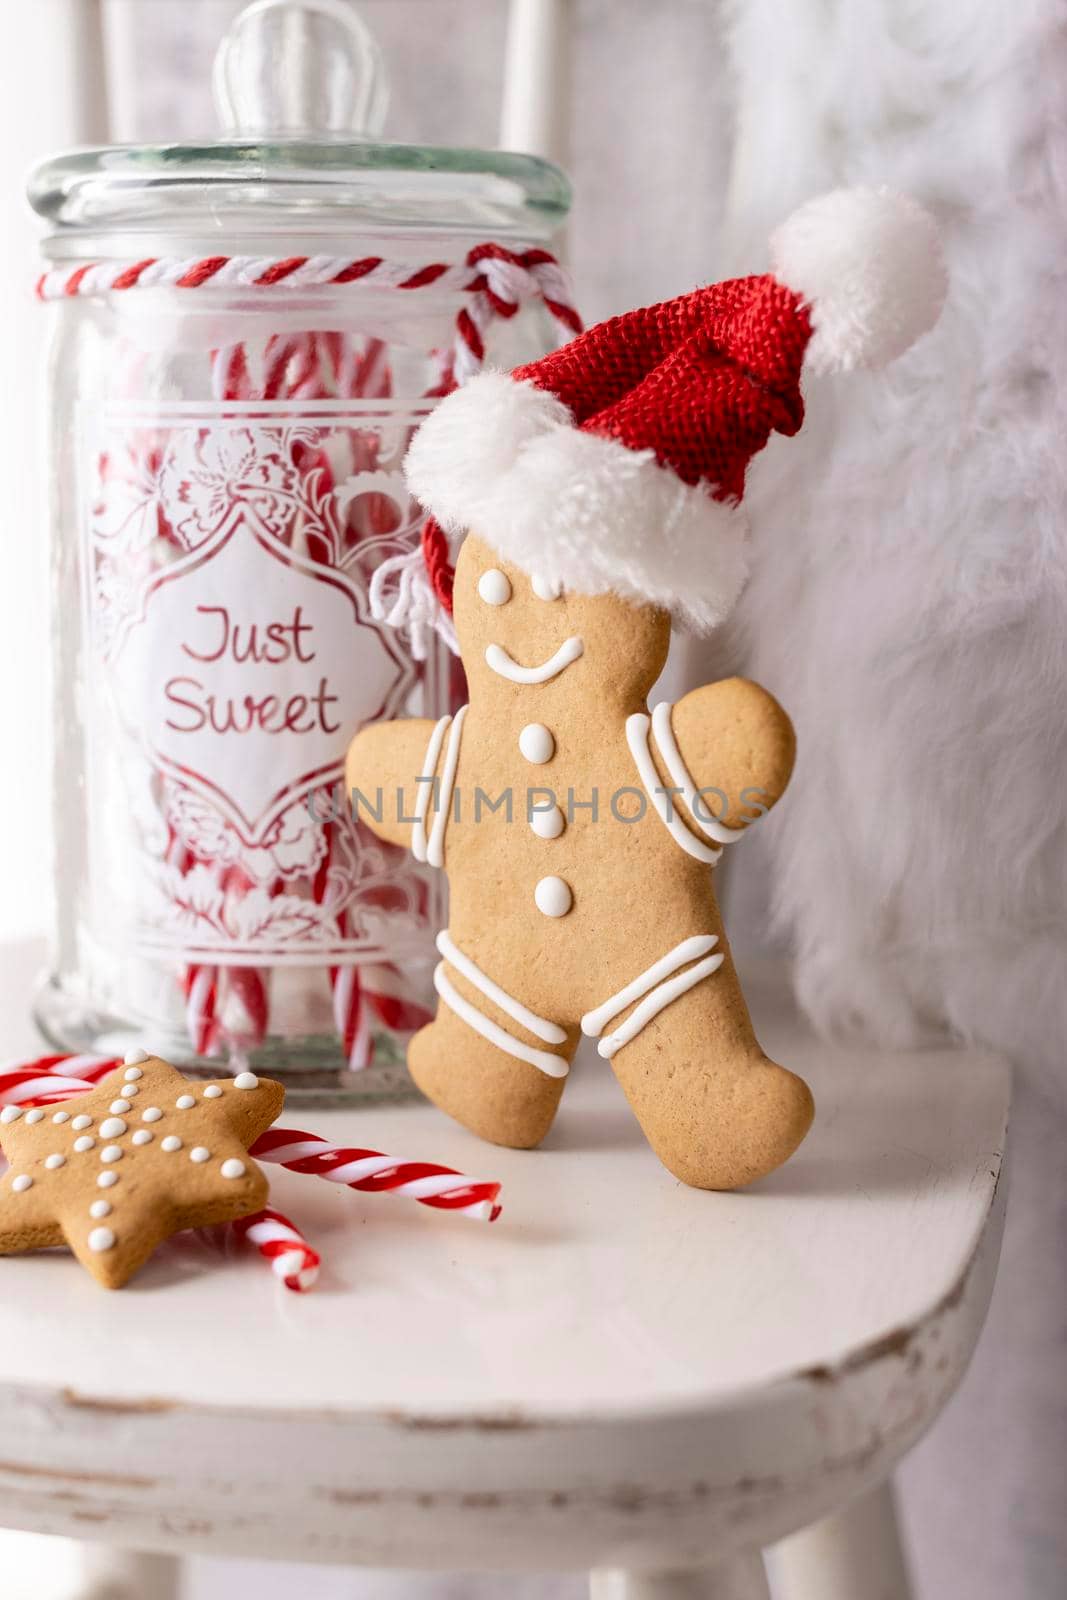 Christmas Santa Claus Hat Hanging On Wood chair, Xmas Concept, Decoration Over Grunge Wooden Background.